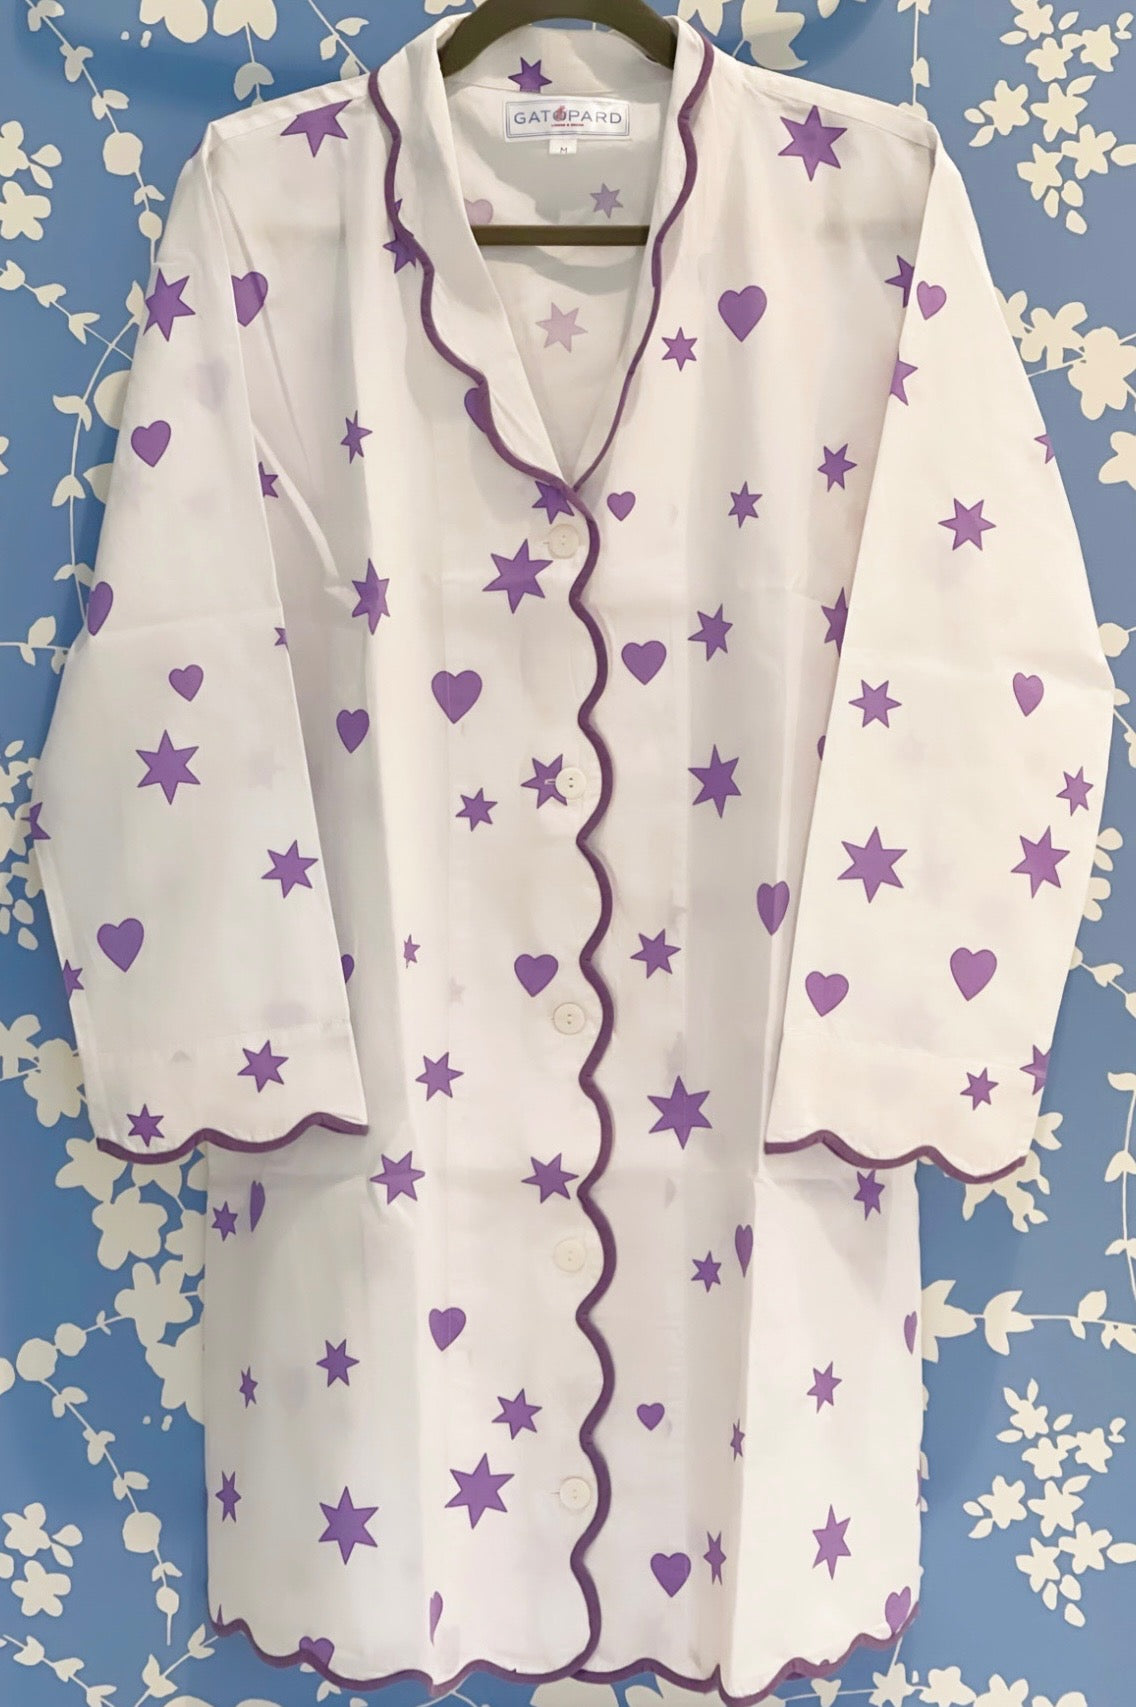 Lavender Heart and Star Nightshirt